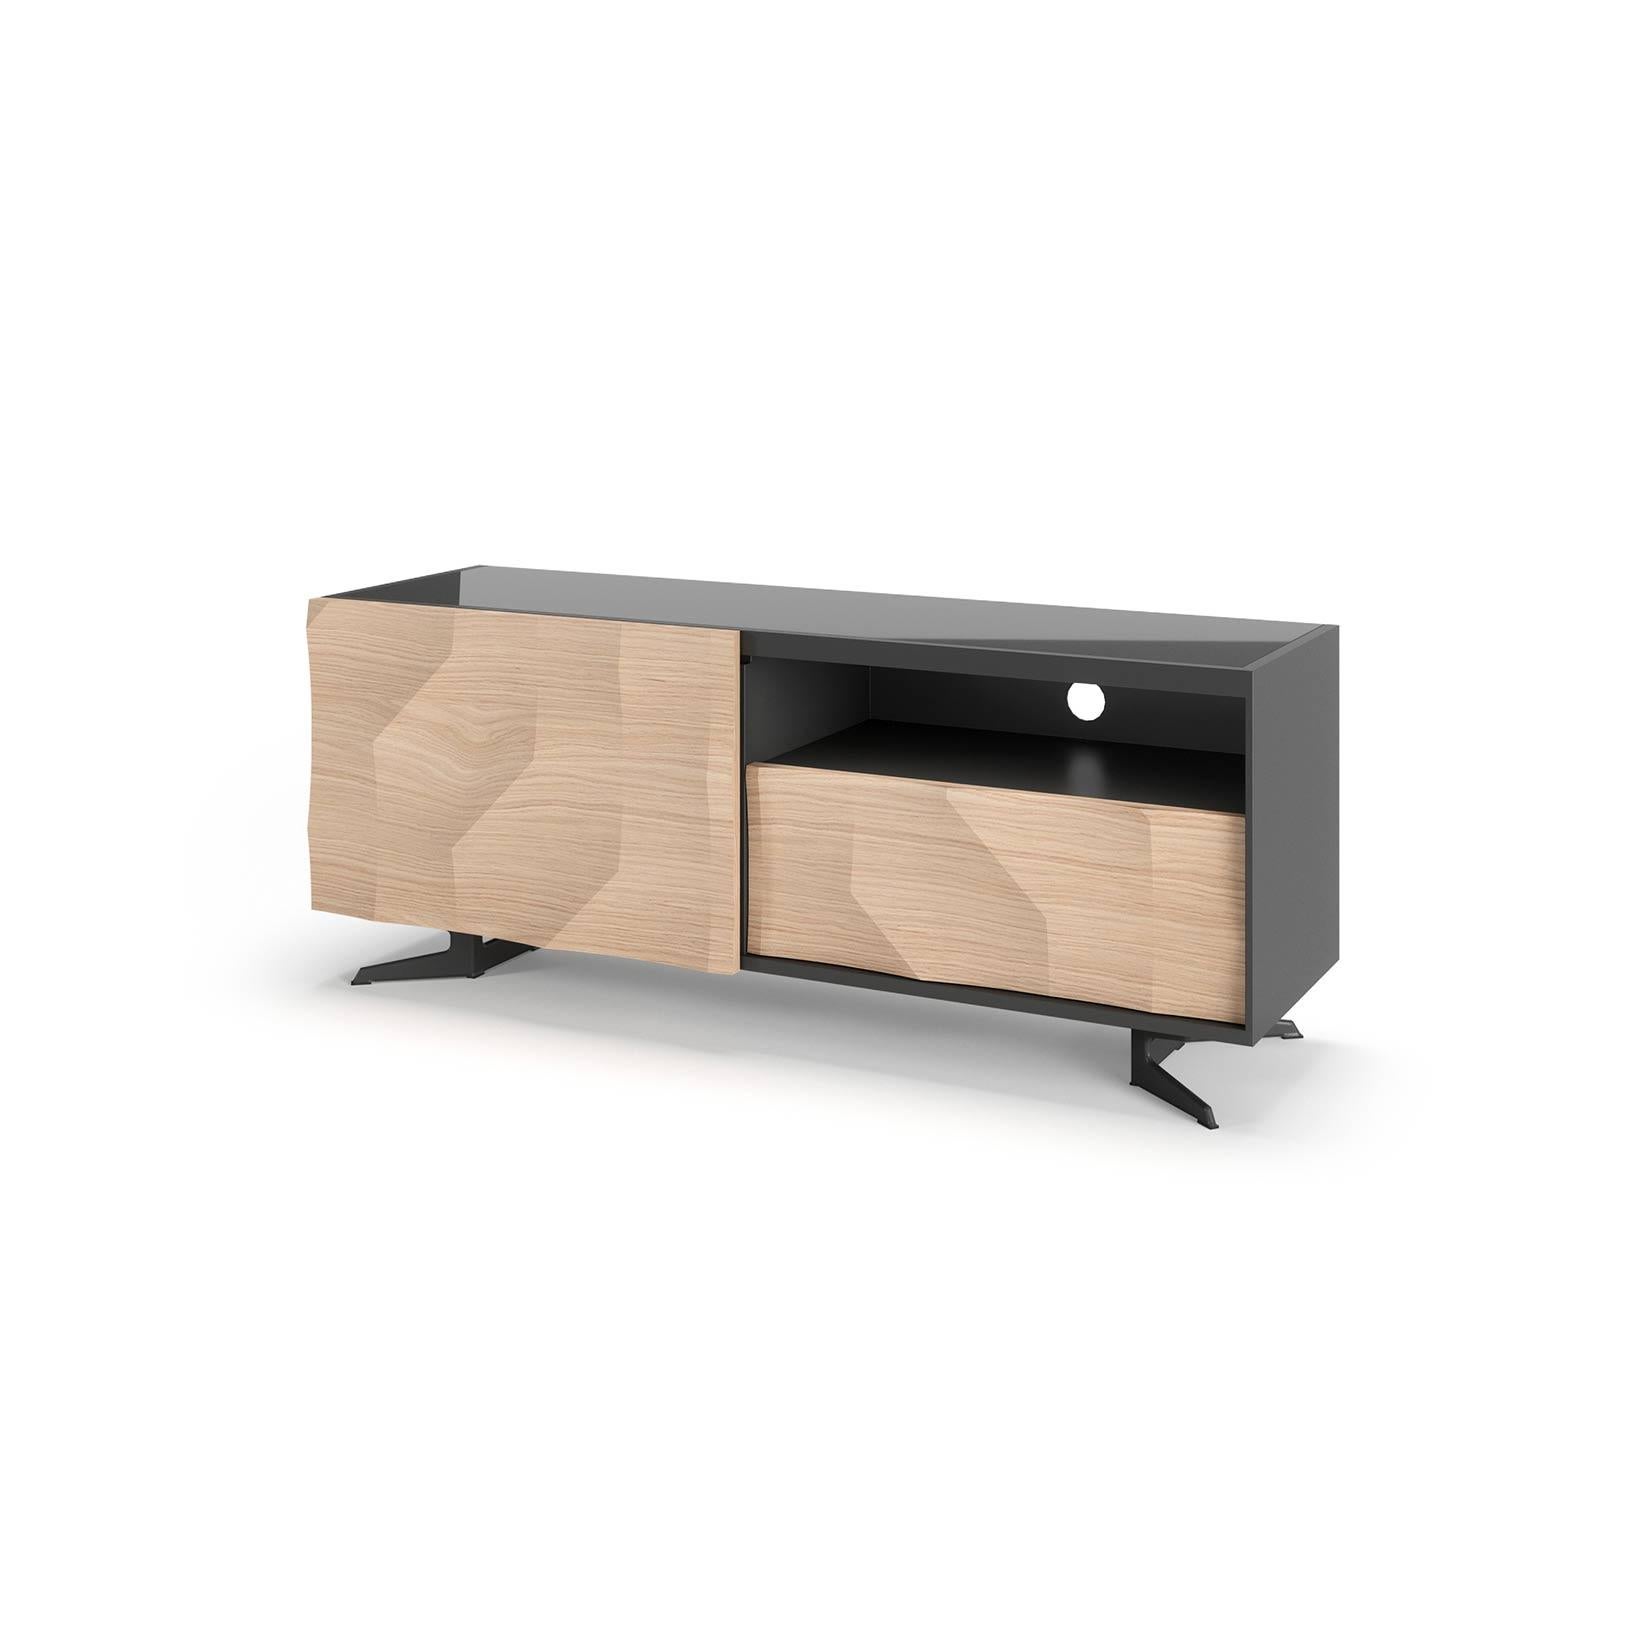 *Collection not sold in France, exclusive to Mobilier de France.*

MonteCarlo TV Stand w/ 2 Doors and 1 Niche w/ Glass Top.

The MonteCarlo collection stands out for its modern and sober look, through the combination of soft and neutral colors that